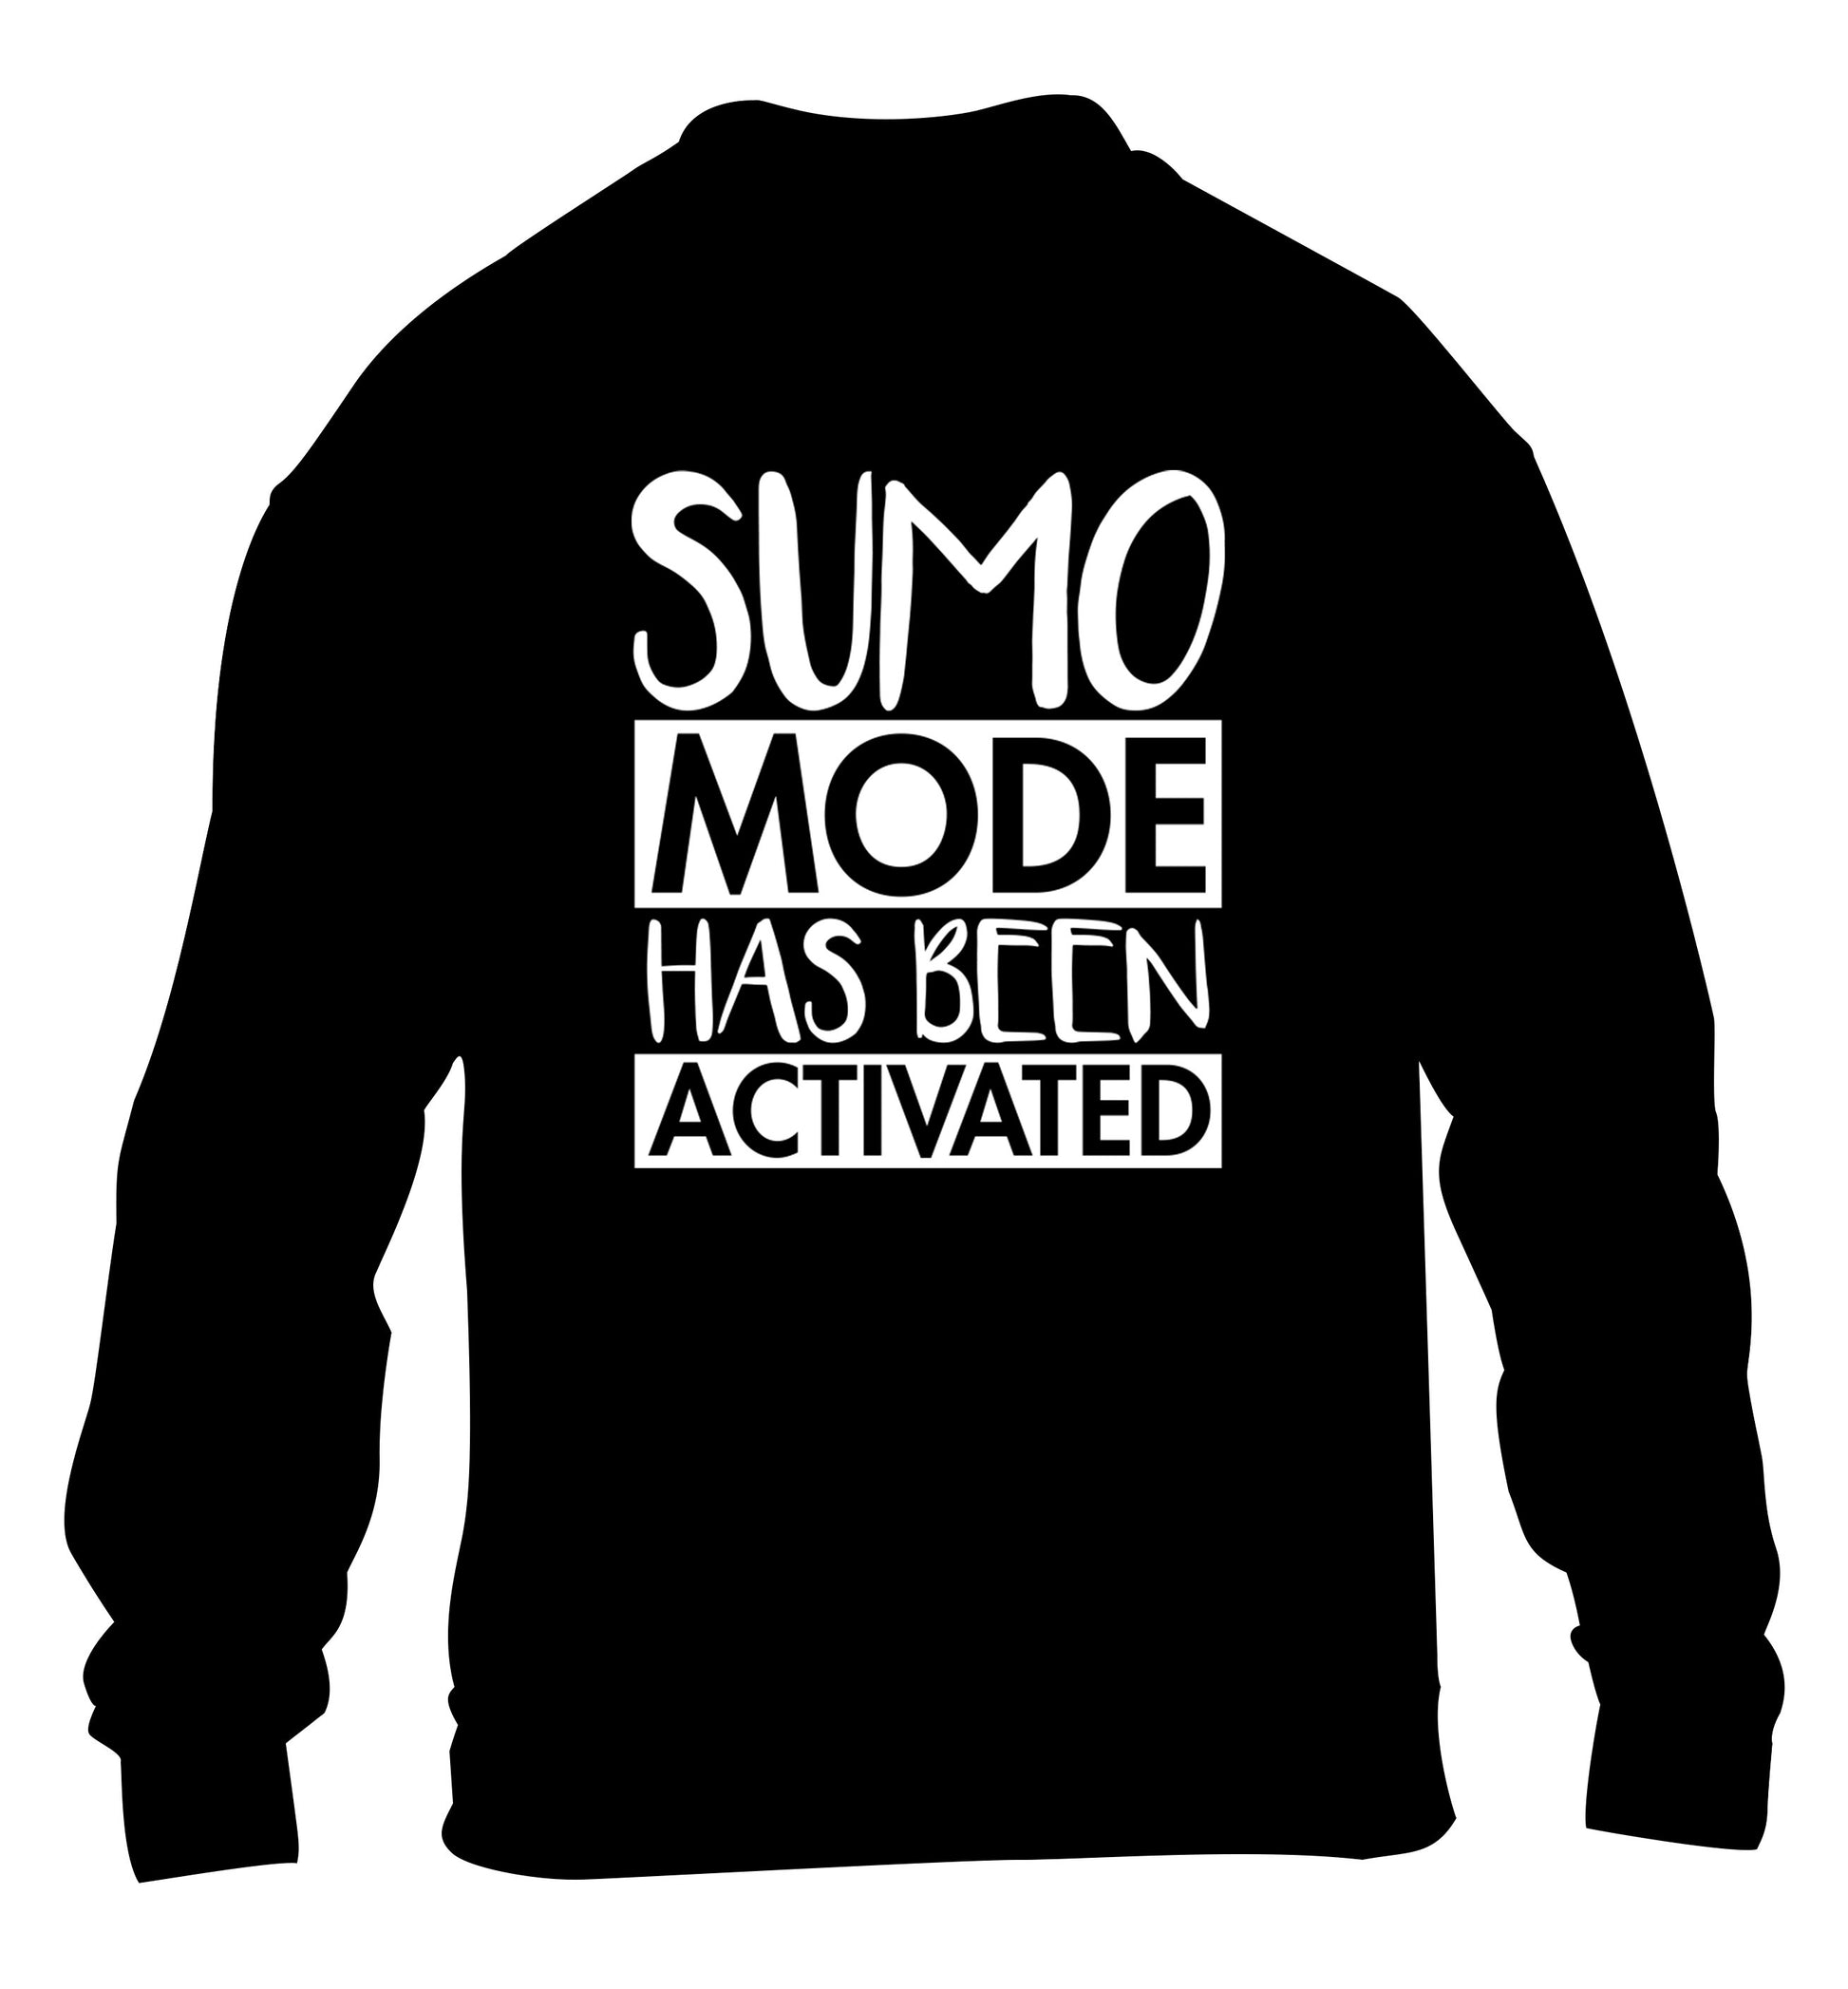 Sumo mode activated children's black sweater 12-14 Years